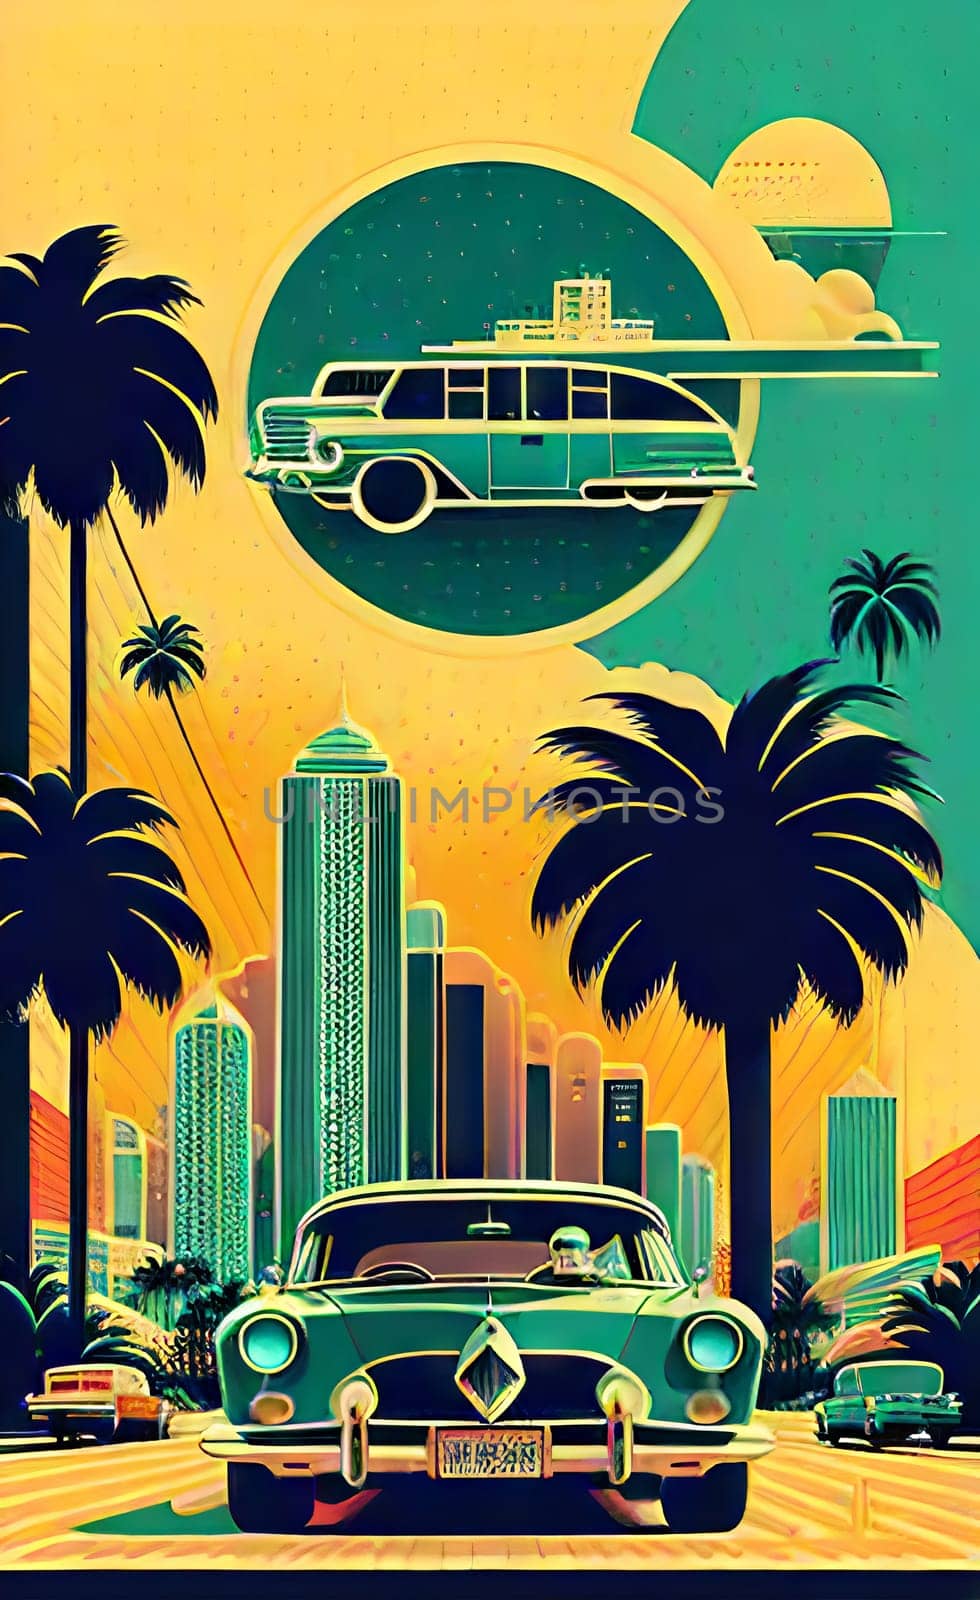 Poster in retro style, with retro cars. by N_Design